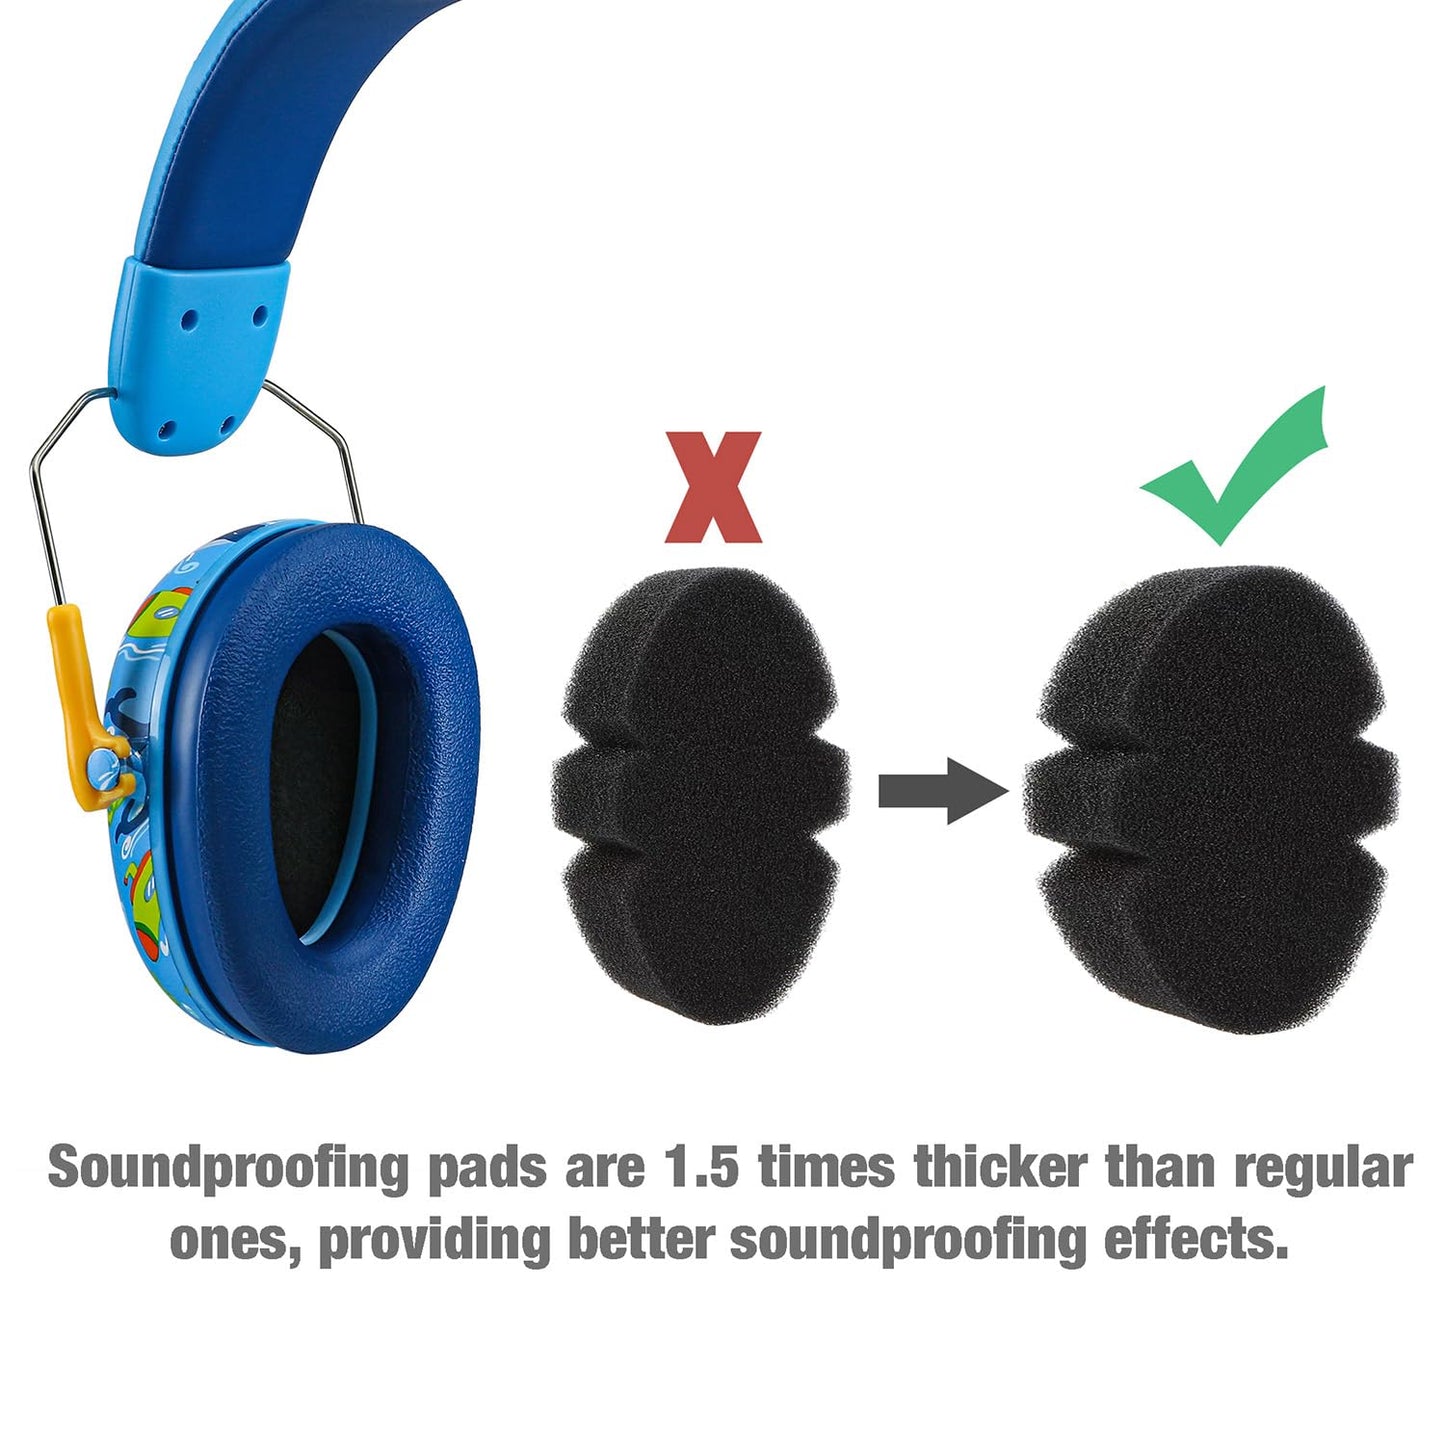 PandaEar Kids Ear Protection Noise Cancelling HeadPhones, NRR 28dB Hearing Protection Earmuffs for Autism, Children, Toddler, Safety Ear Muffs for Sport Games, Concerts, Fireworks (Blue)